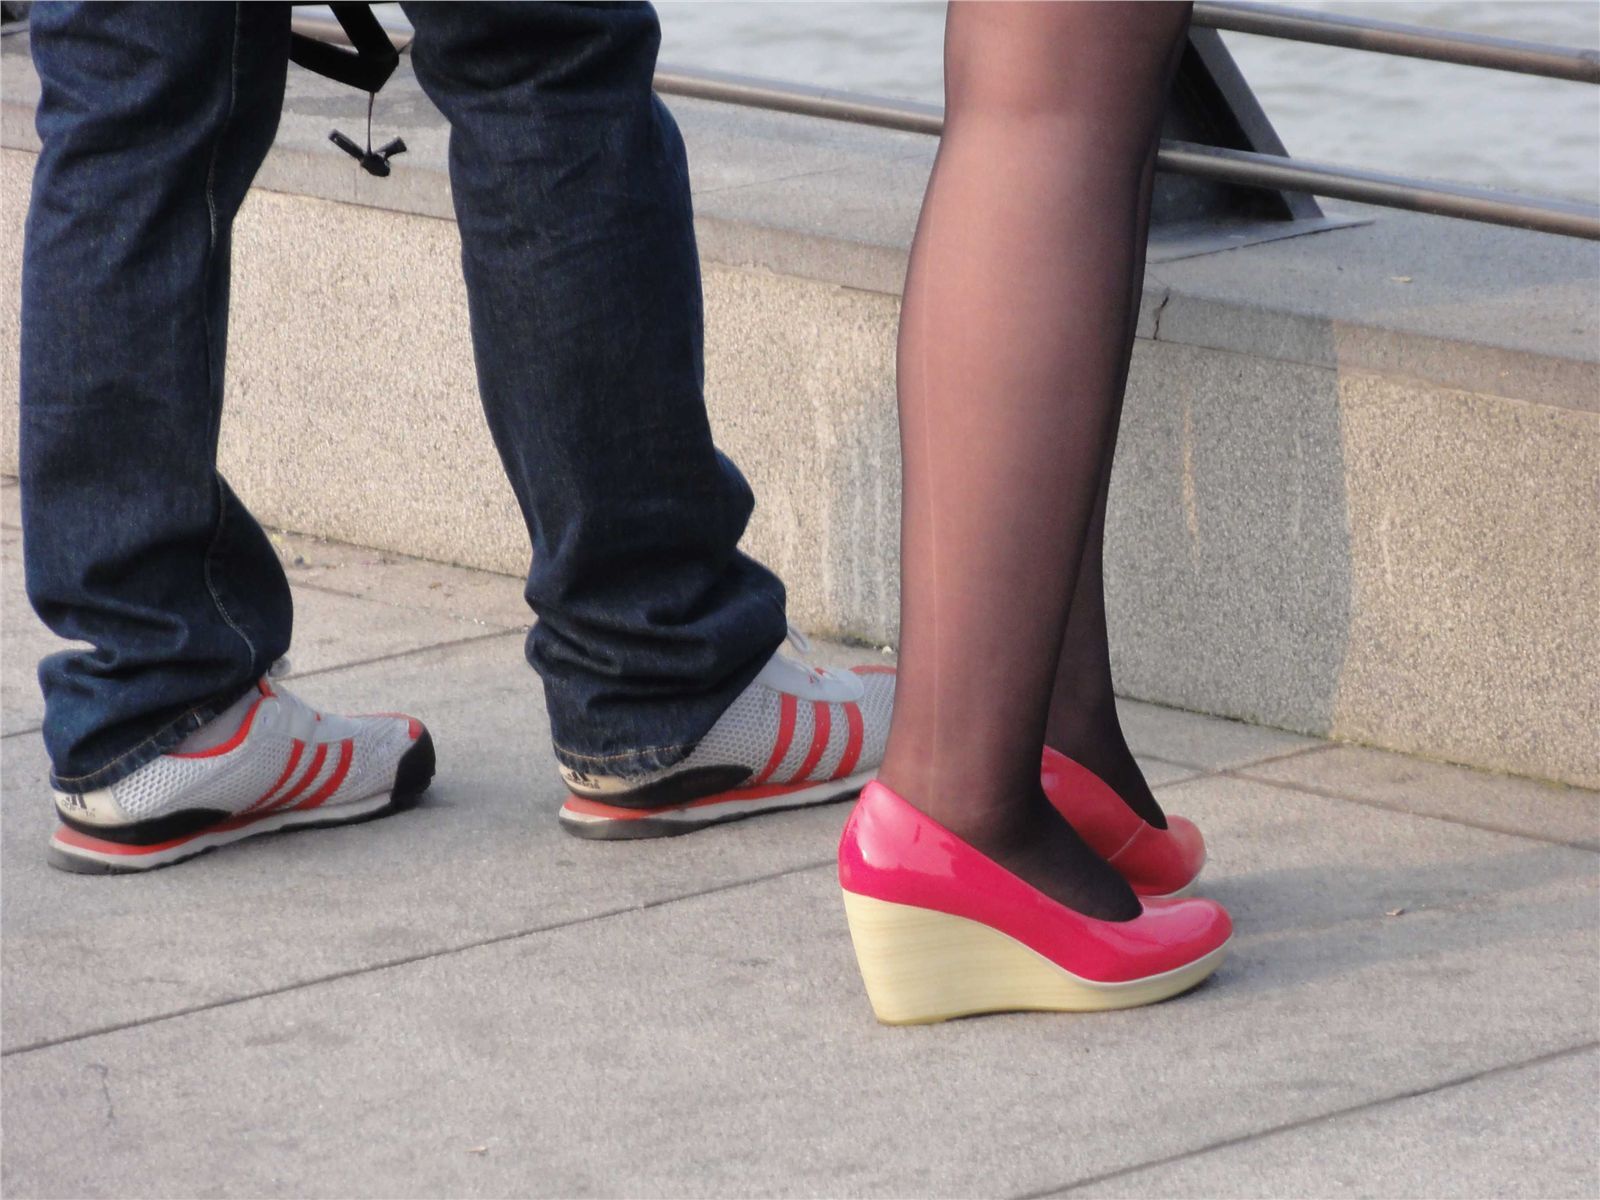 [outdoor Street Photo] 2013.09.06 Bund beauty black silk red shoes, thin stockings